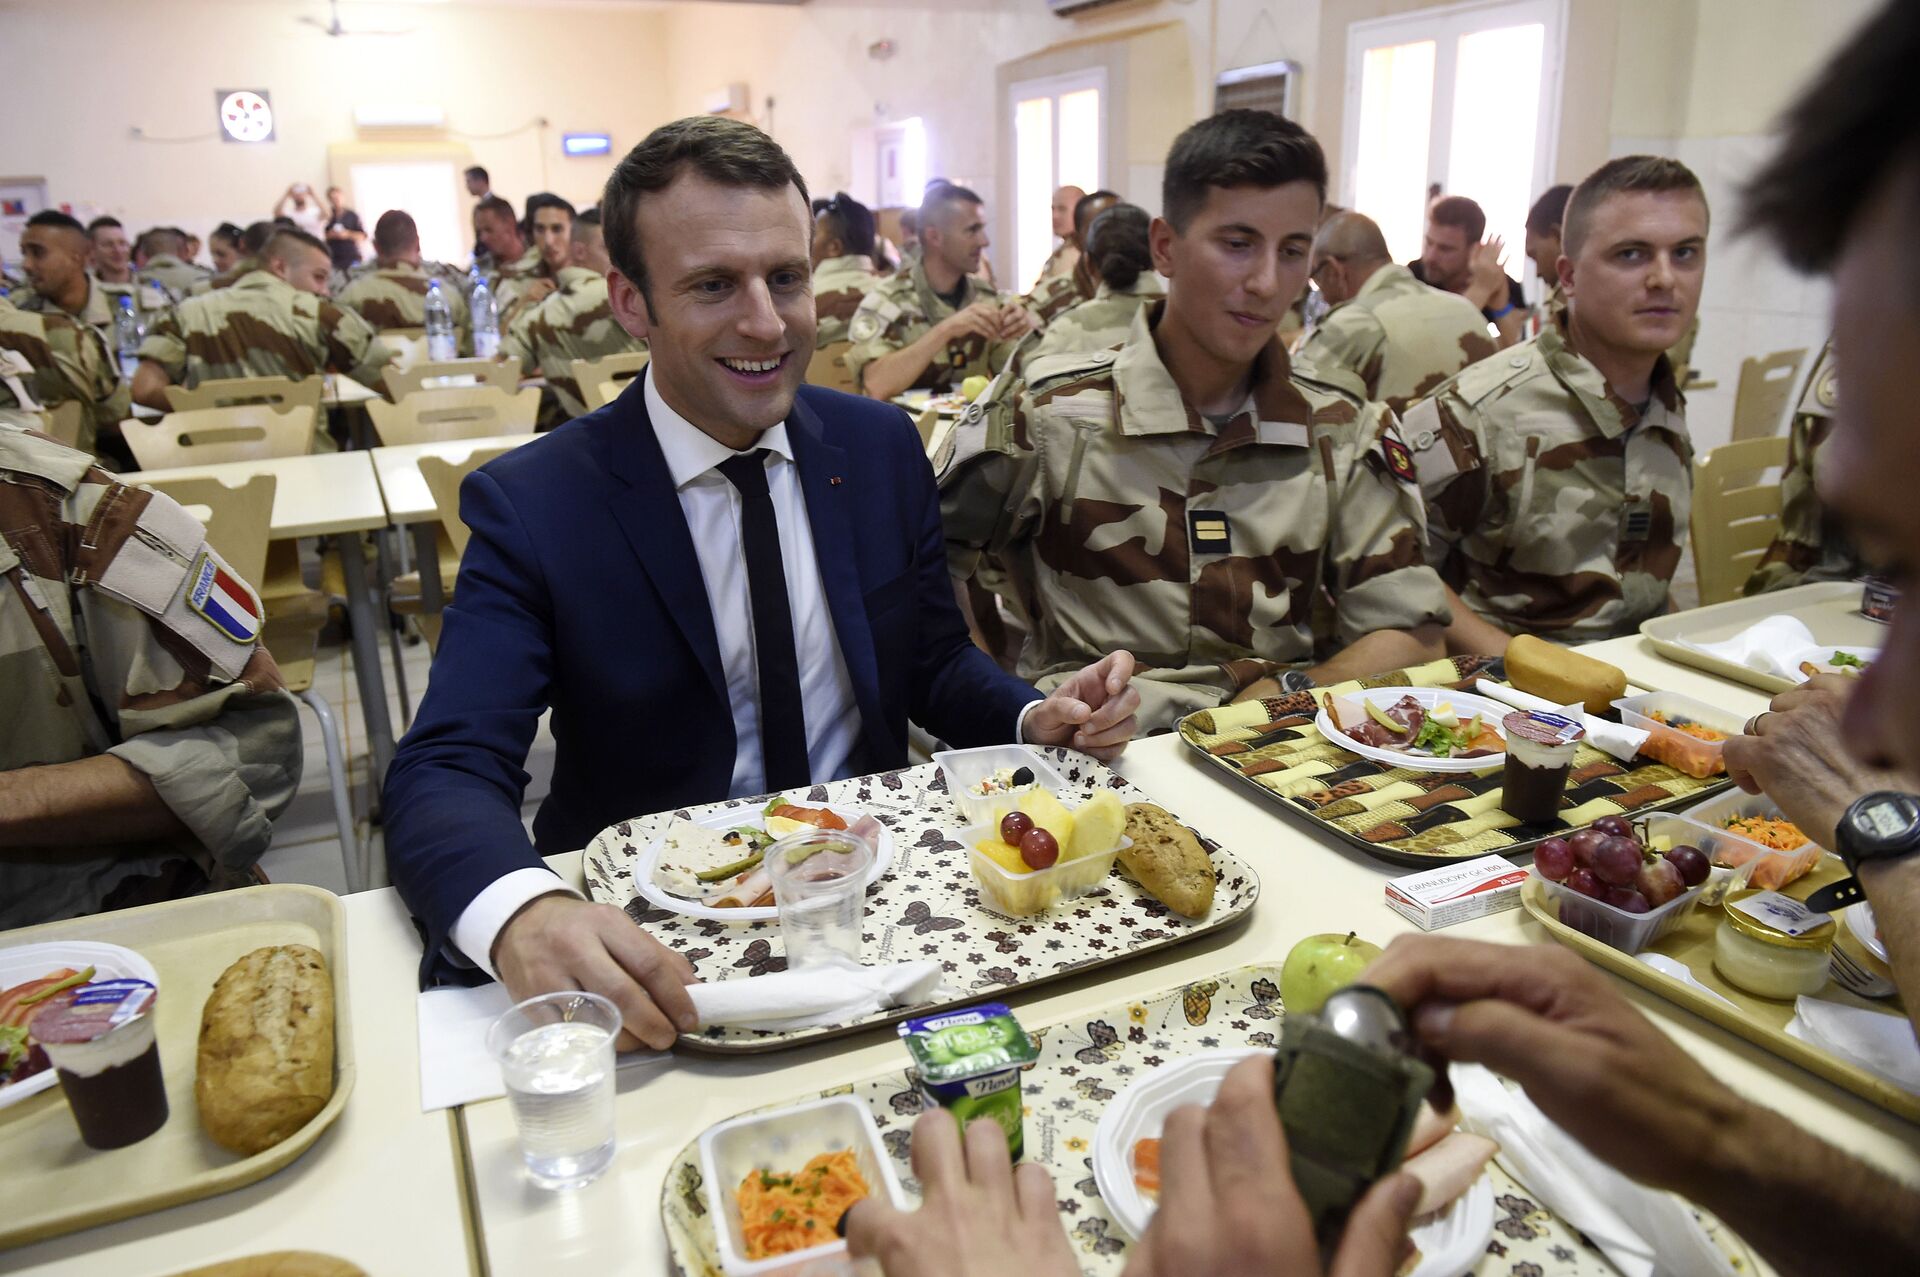 French President Emmanuel Macron (C) has a lunch break with French troops during his visit to France's Barkhane counter-terrorism operation in Africa's Sahel region in Gao, northern Mali, on May 19, 2017.  - Sputnik International, 1920, 18.08.2022